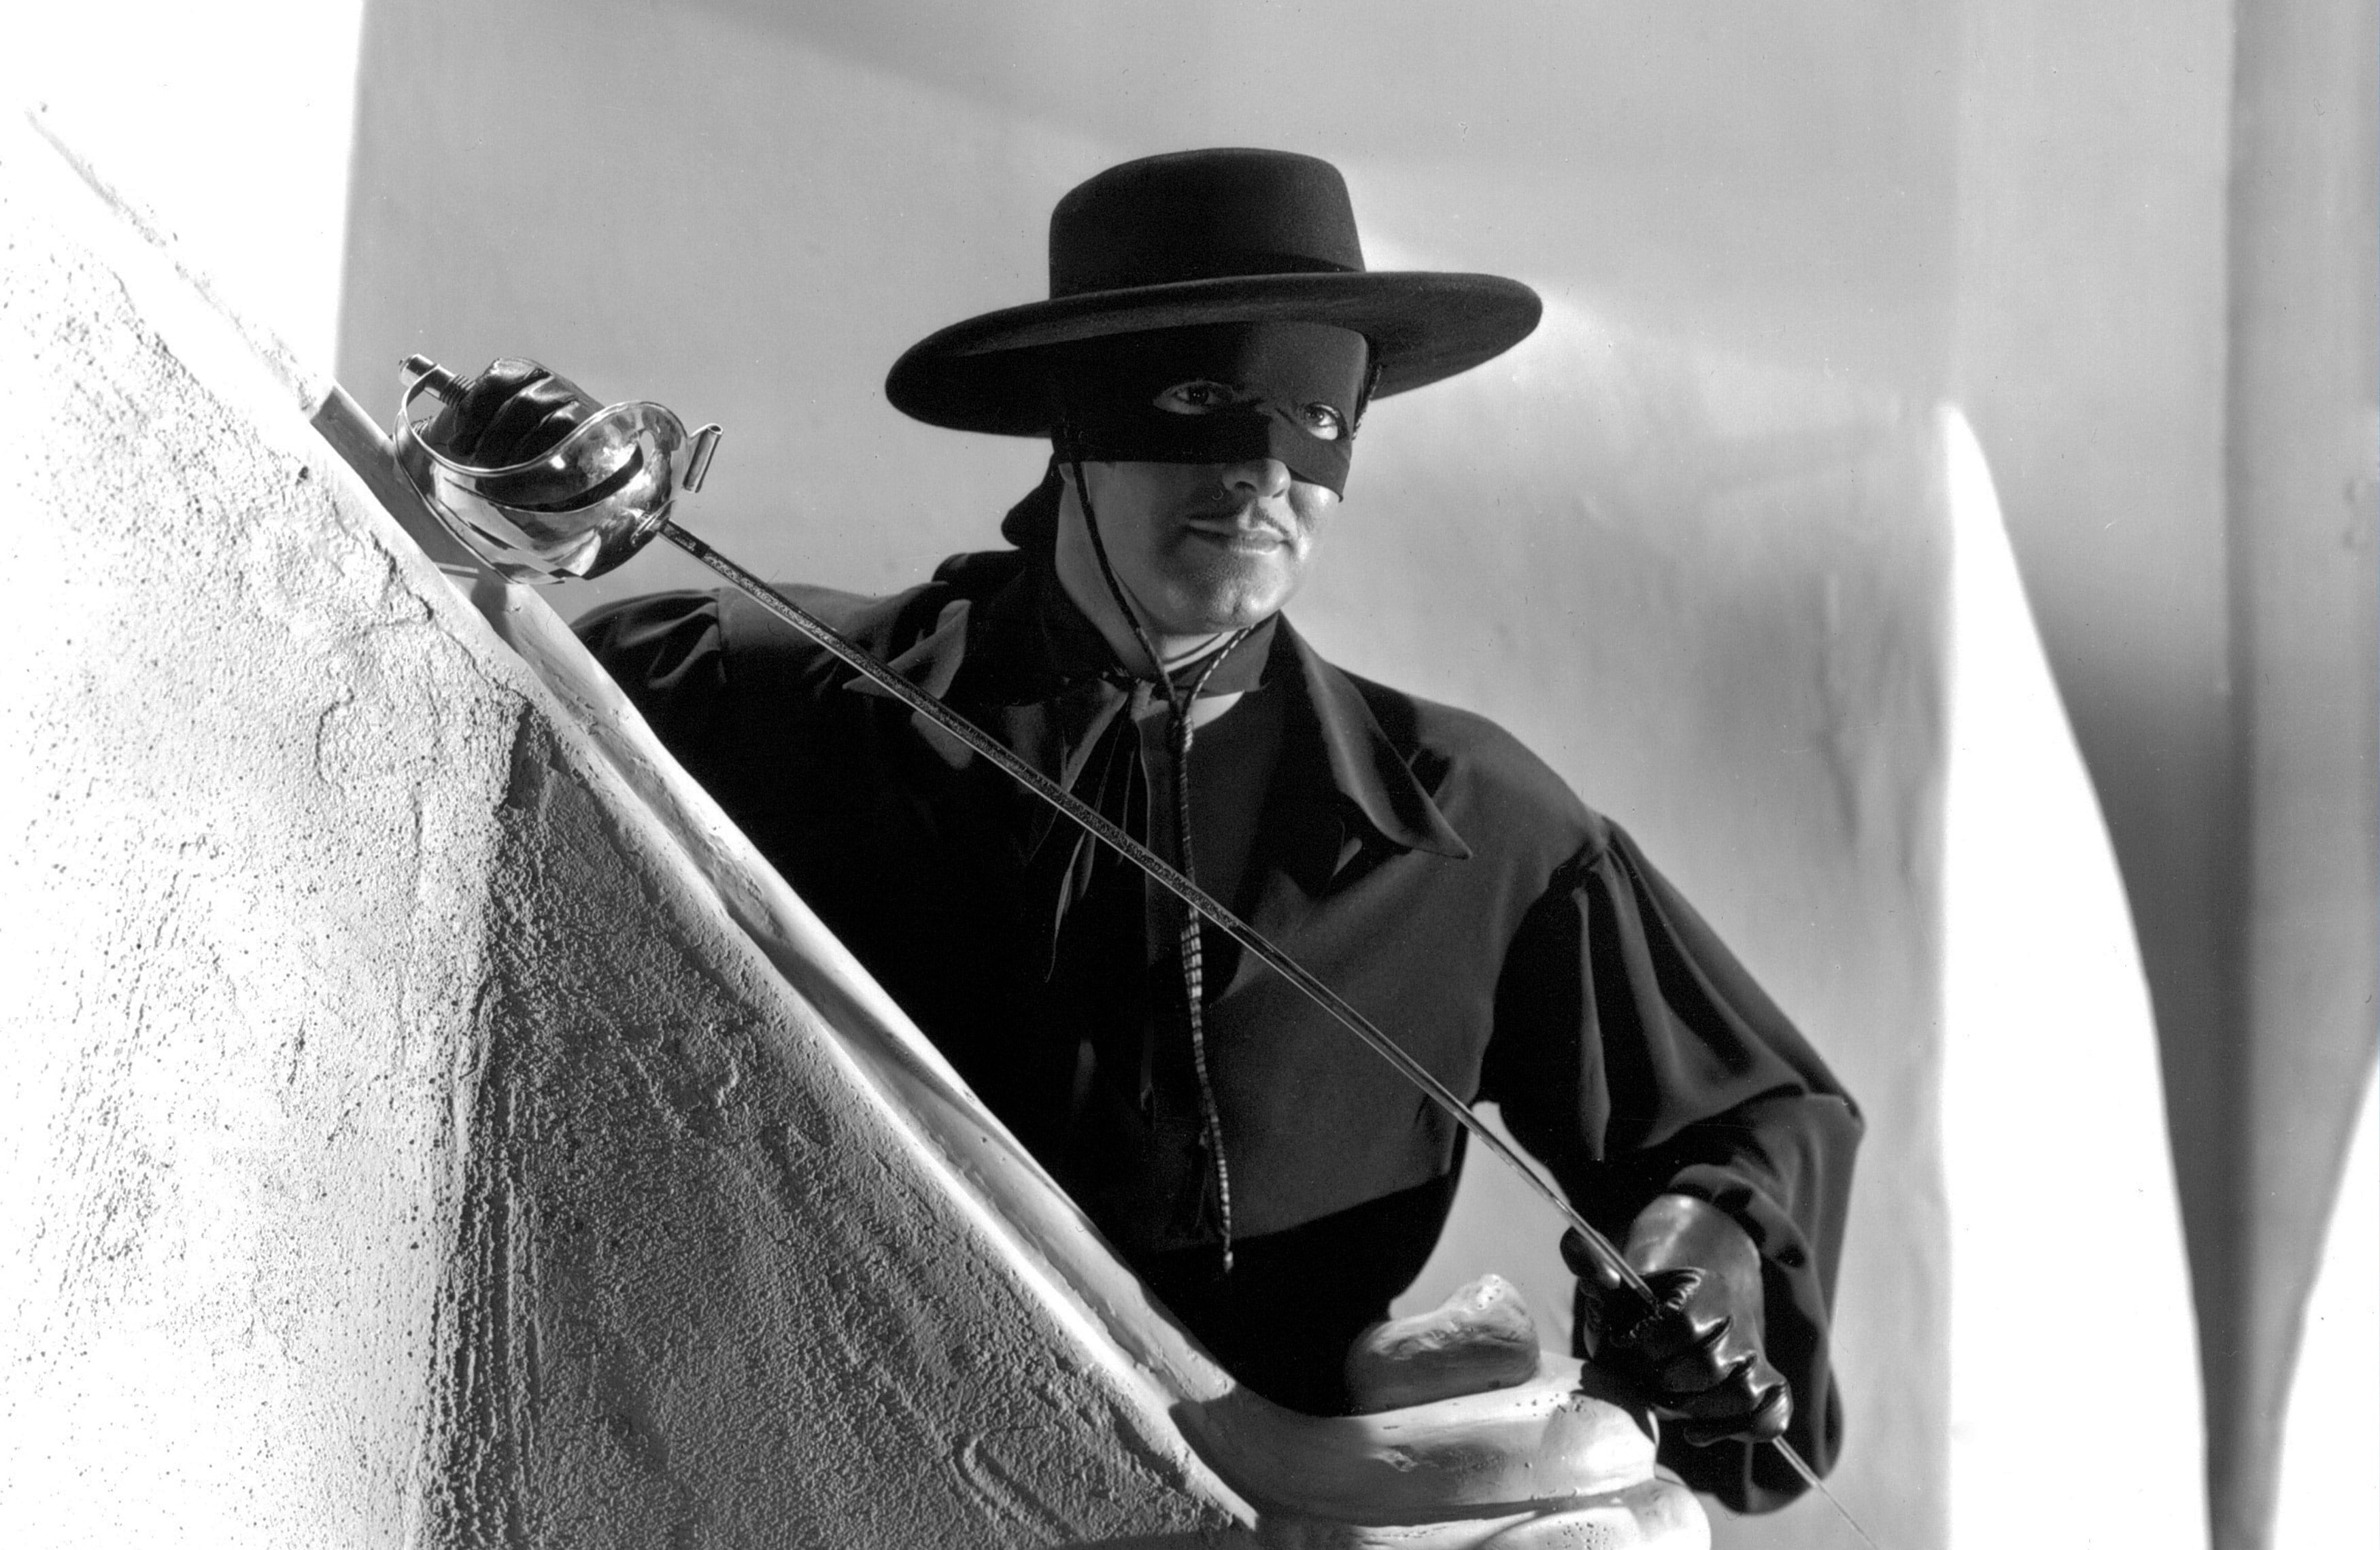 The Mask of Zorro (1940) | The 8 Best Superhero Movies With Oscar Wins or Nominations | Zestradar